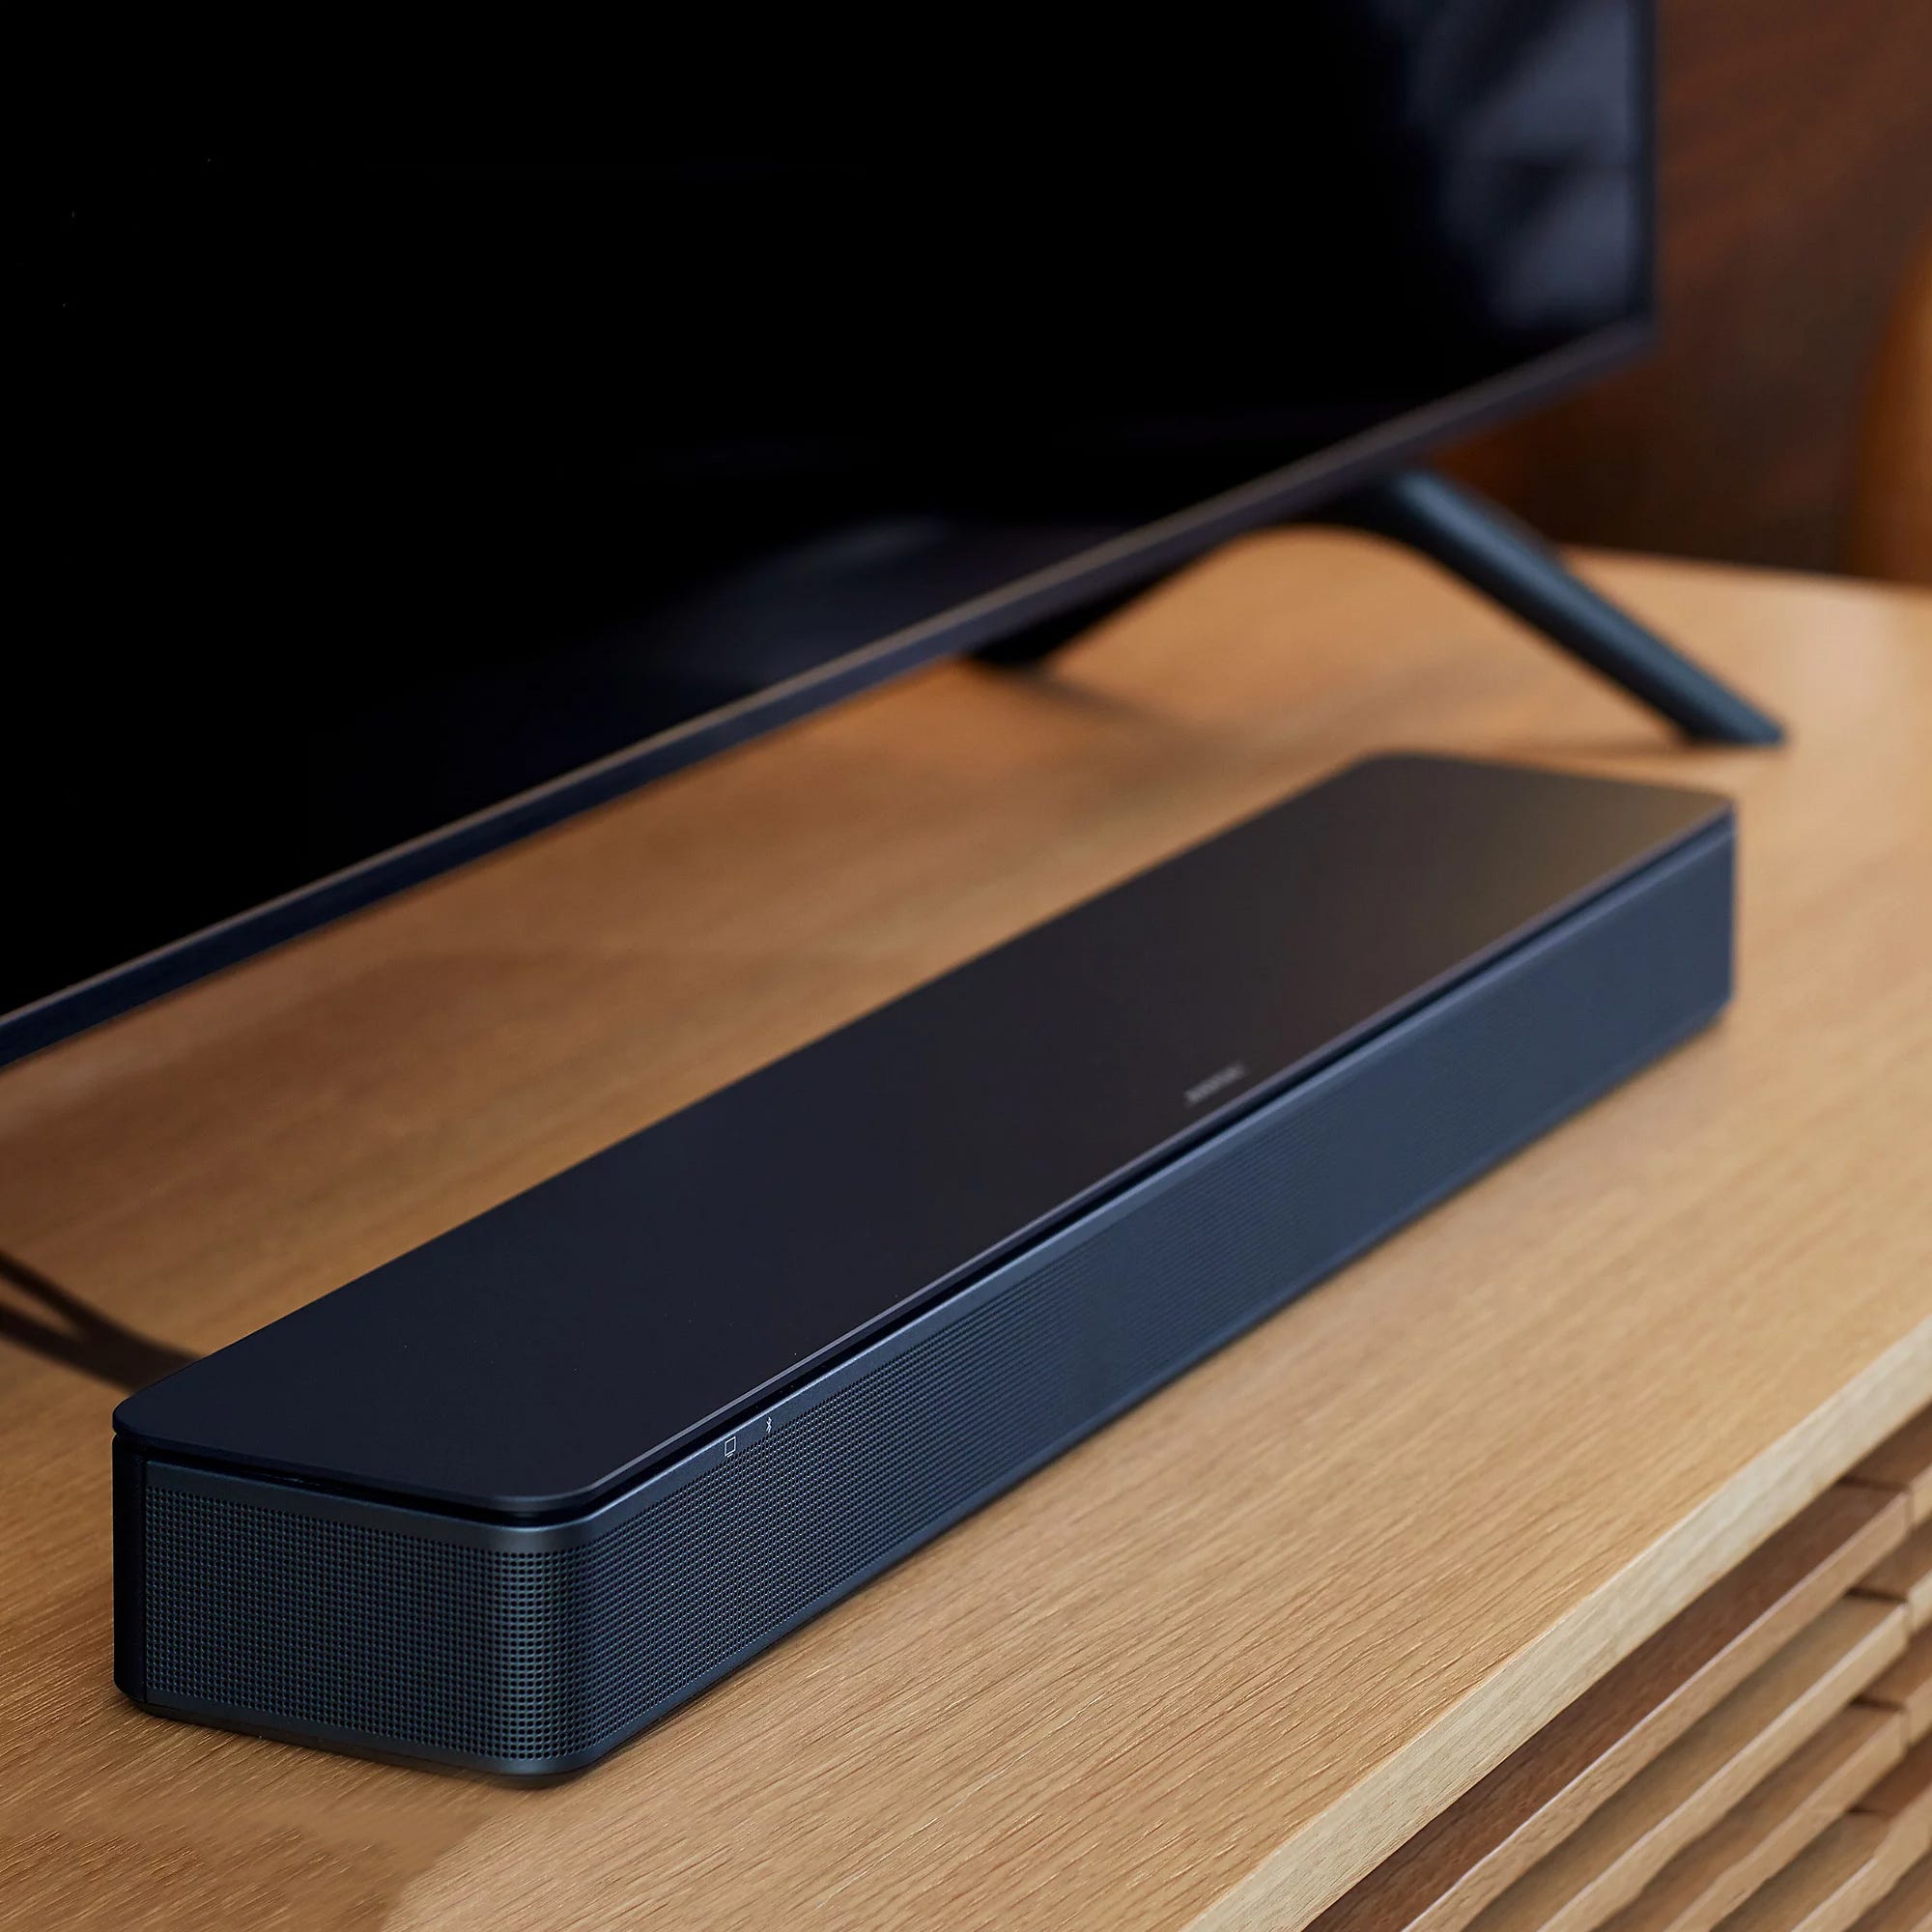 A black soundbar is situated in front of a flat-screen TV on a wooden surface.